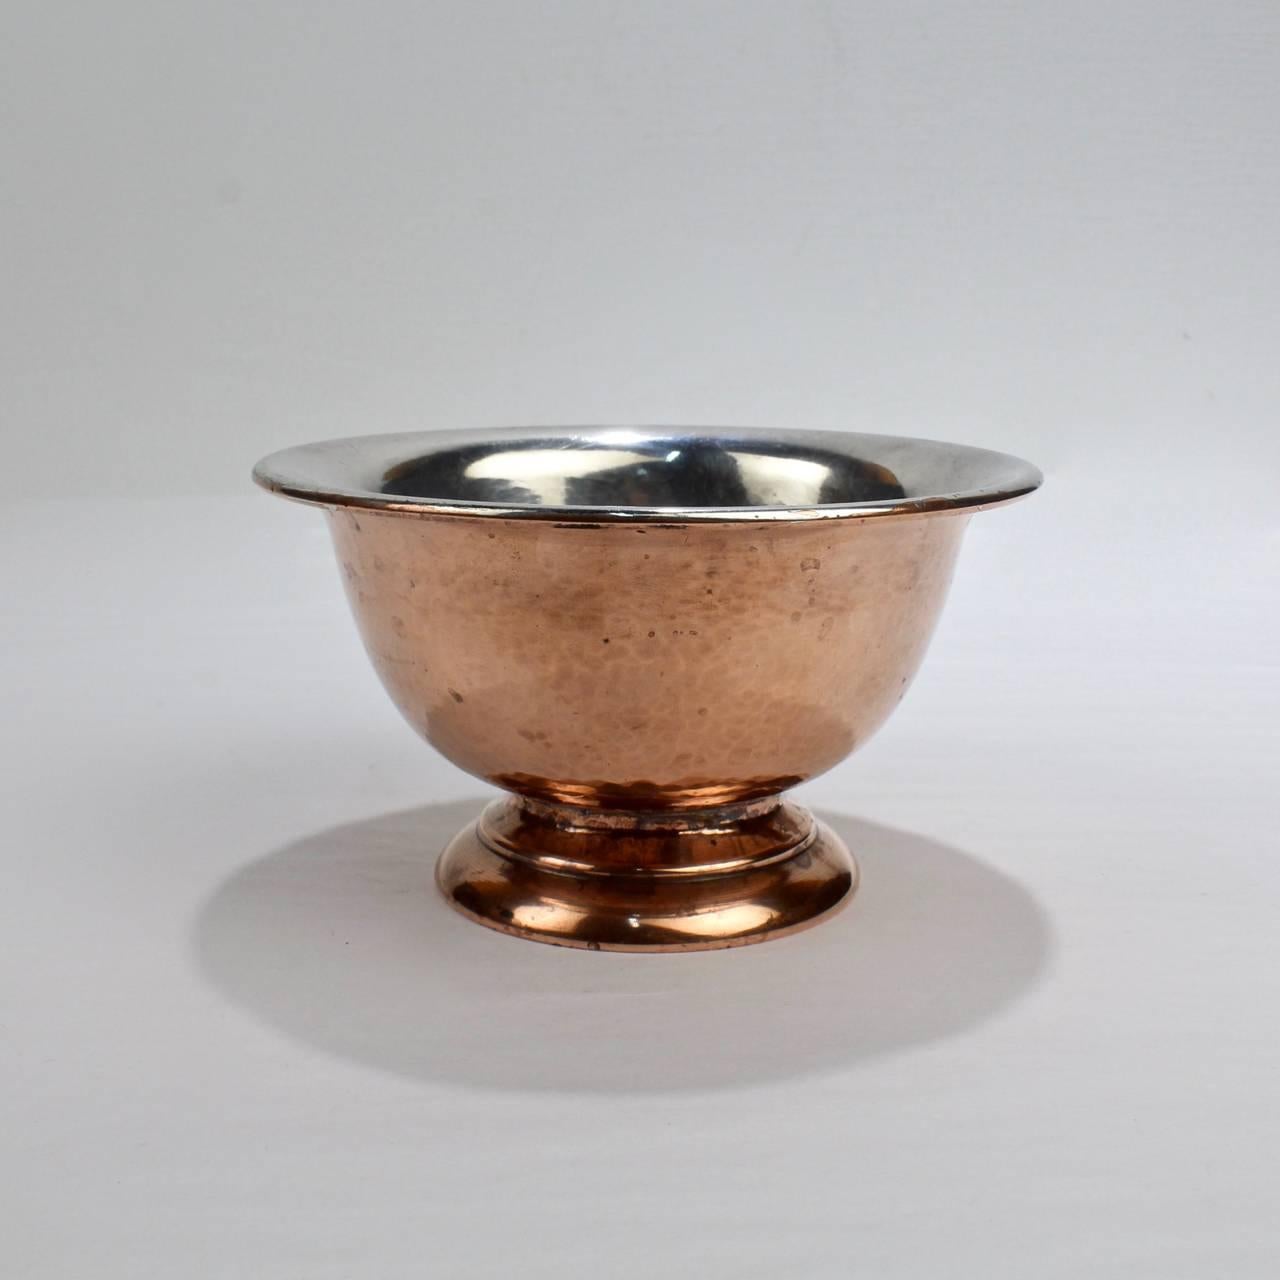 An fine, diminutive, period bowl by the Boston Arts and Crafts Metalsmith - George Gebelein.

Comprised of hand-hammered silver and copper in the traditional Paul Revere form - an innovative riff on a New England classic.

Base stamped with the